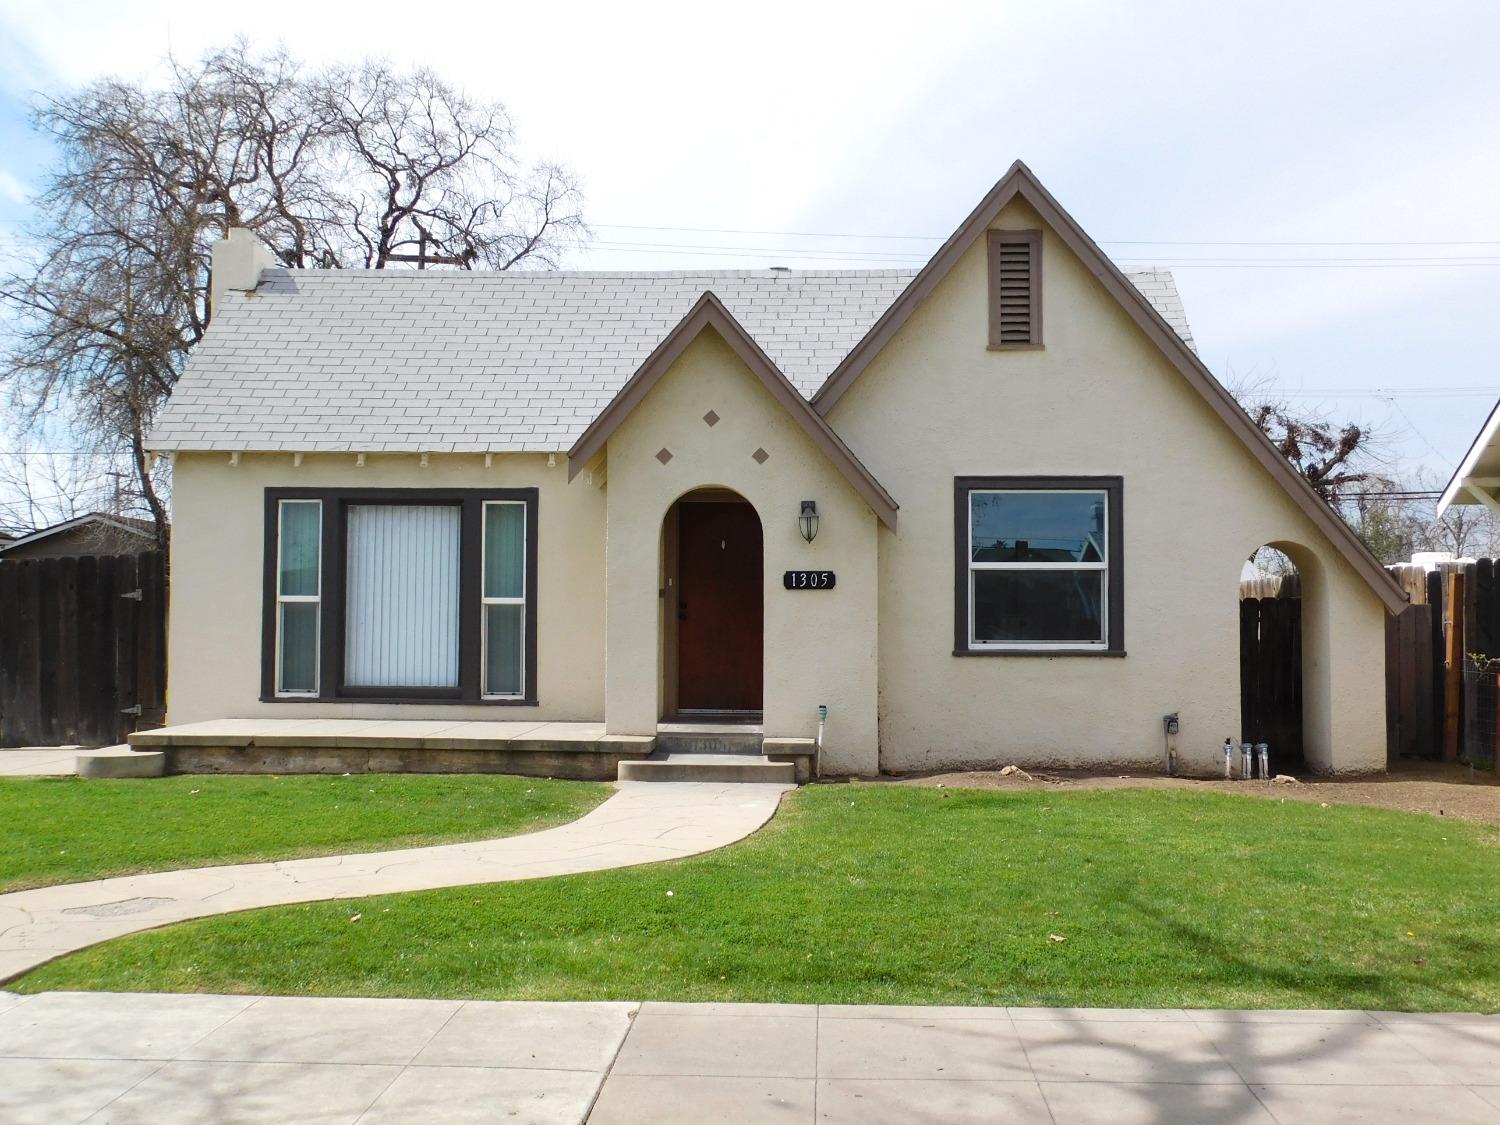 Photo of 1305 N Ferger Ave in Fresno, CA